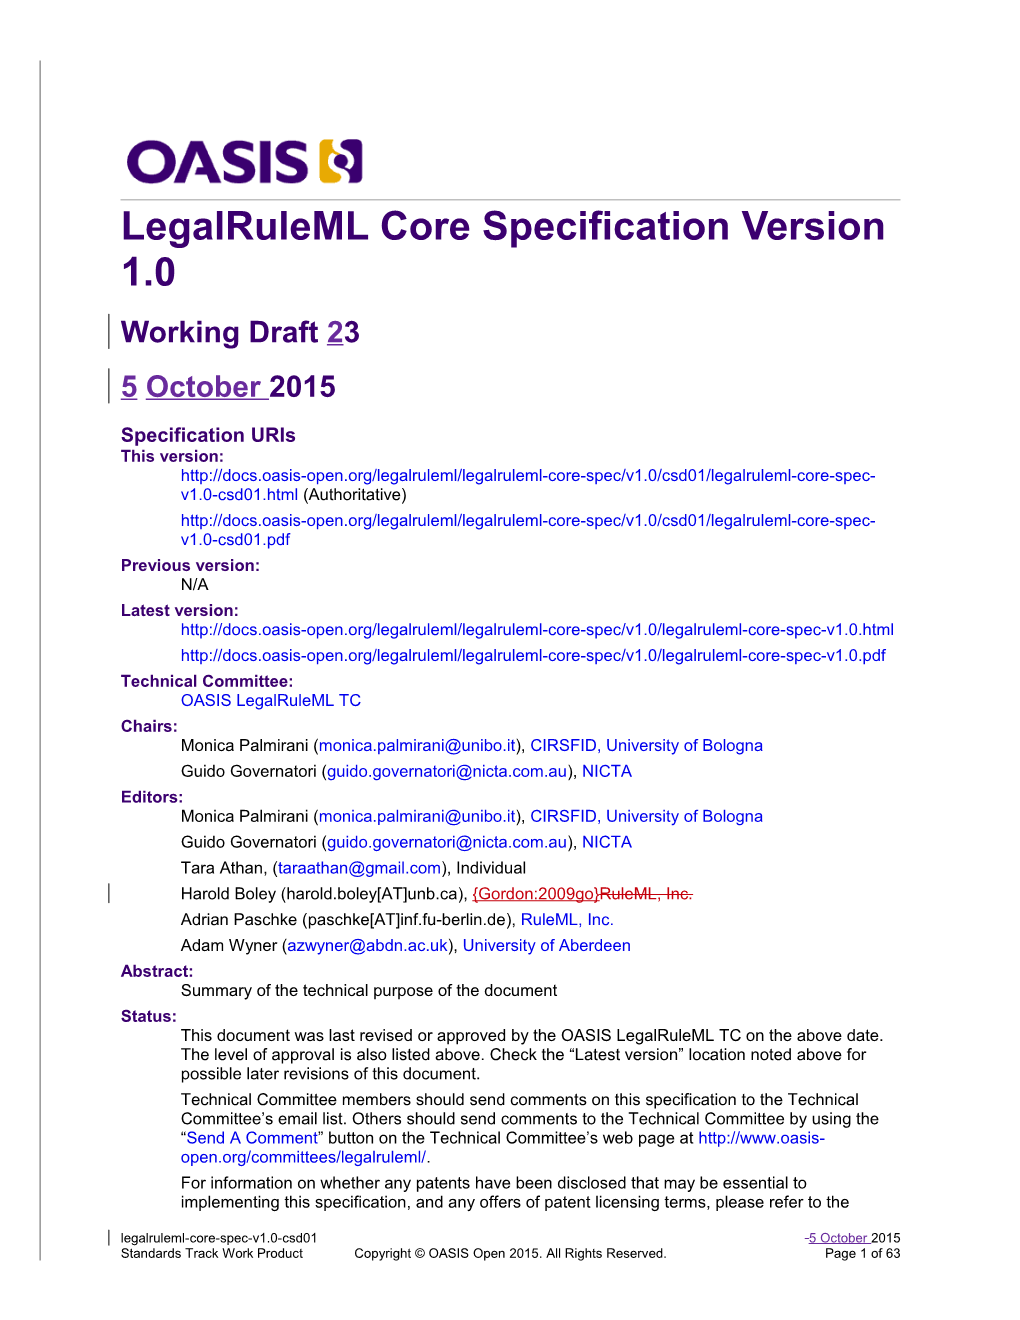 Legalruleml Core Specification Version 1.0